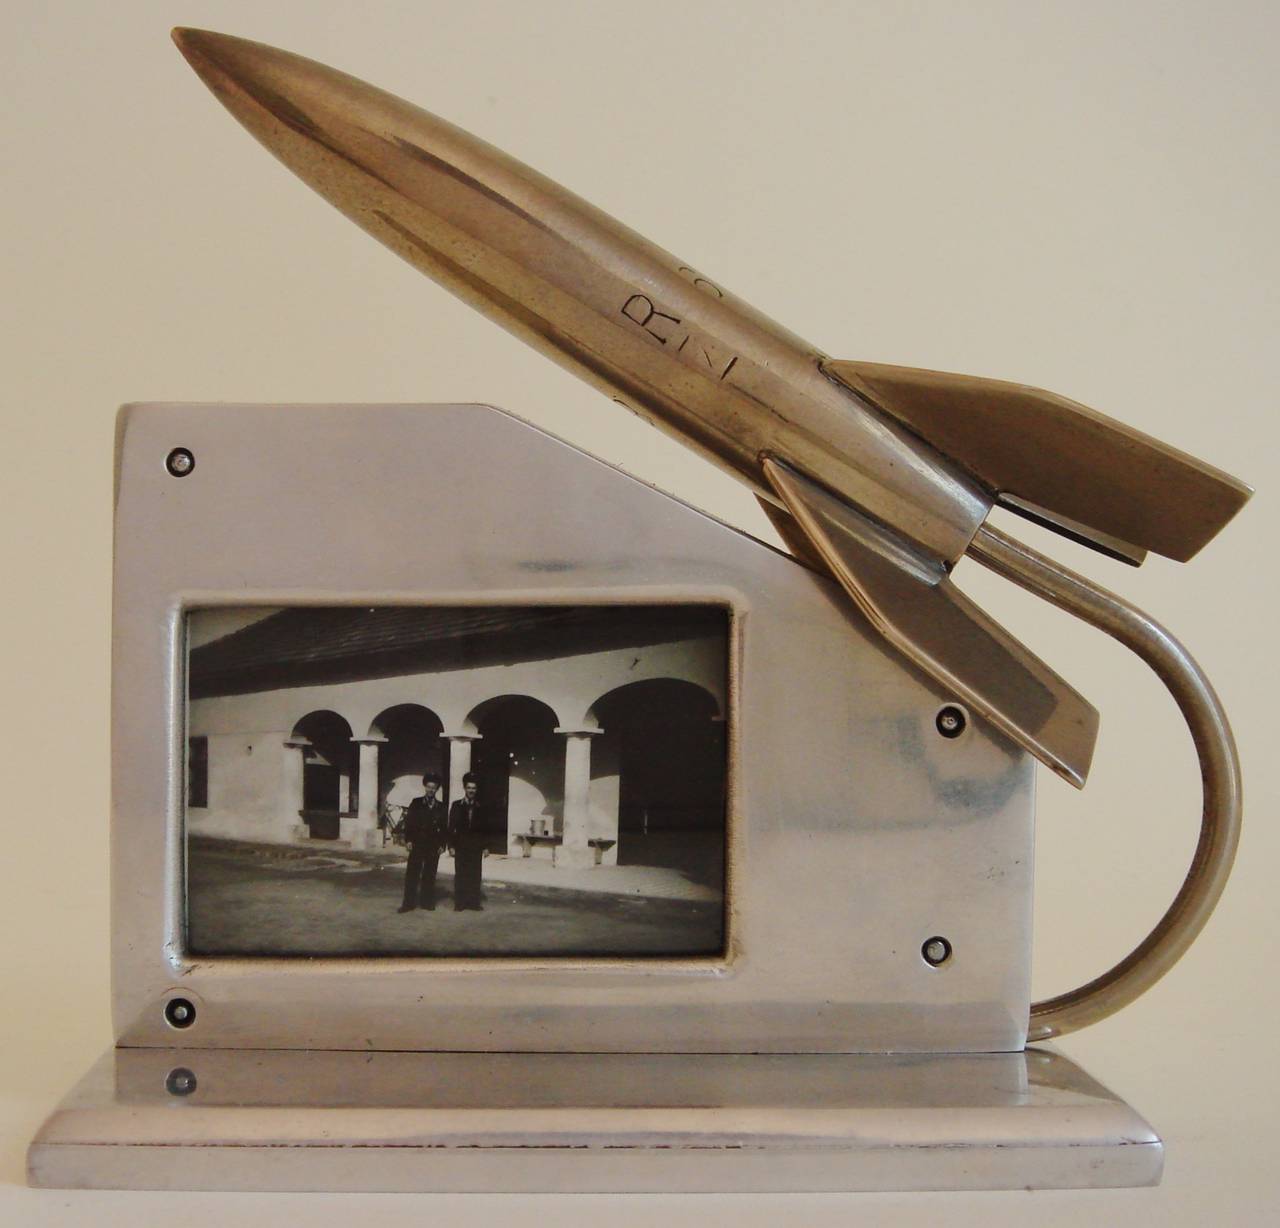 Polished American Jet-Age Outsider or Trench Art Aluminium Double-Sided Rocket Frame